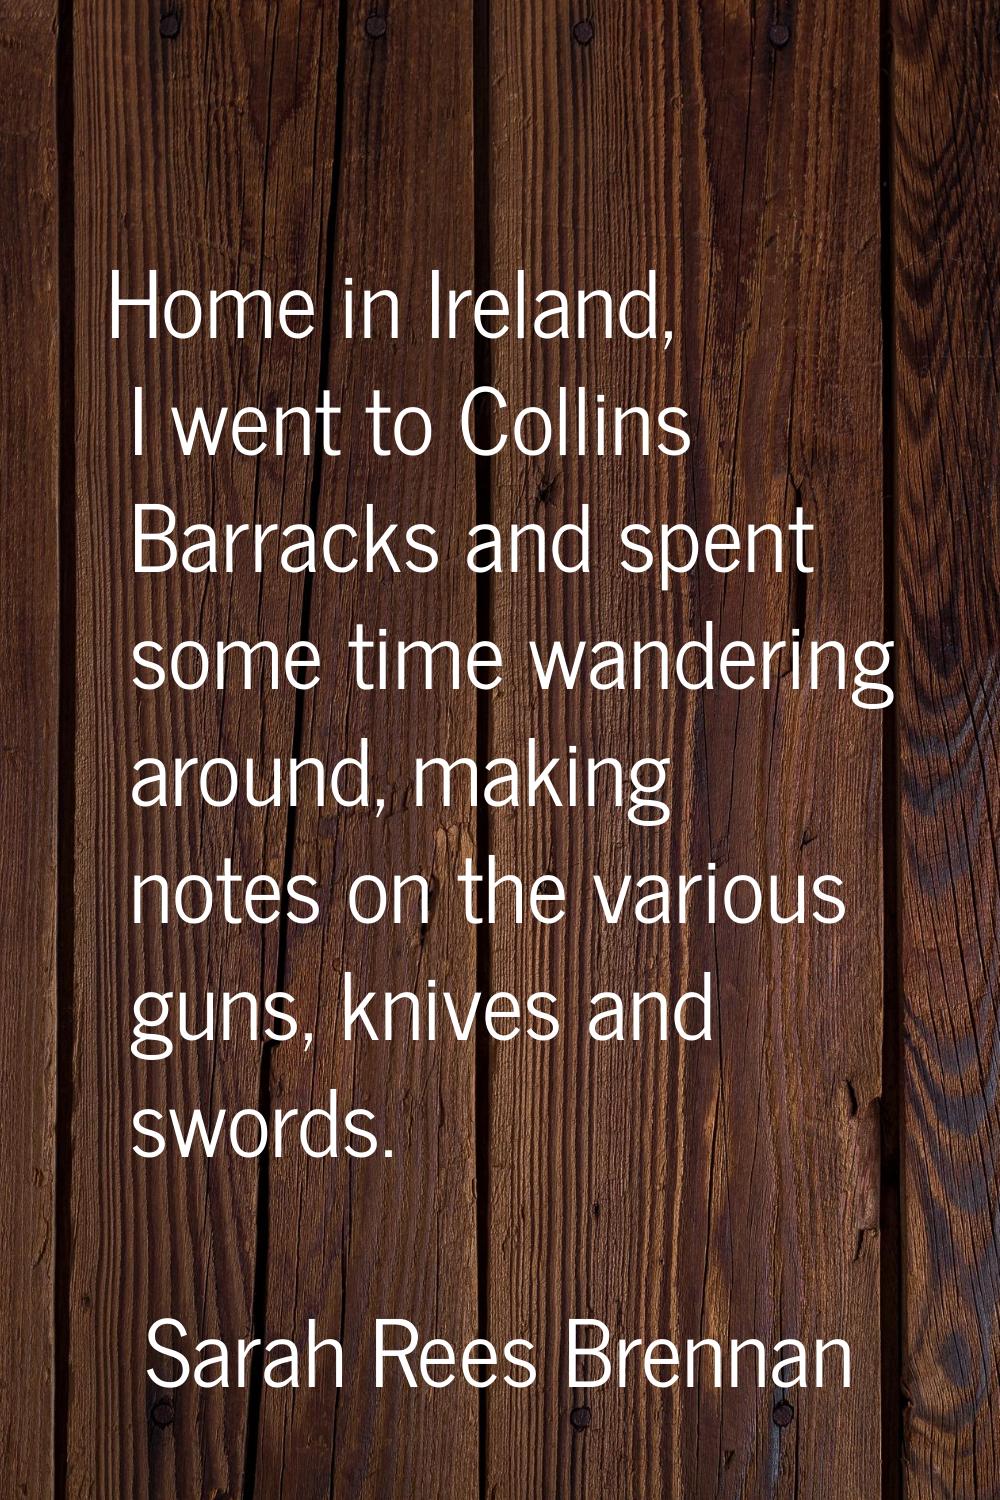 Home in Ireland, I went to Collins Barracks and spent some time wandering around, making notes on t